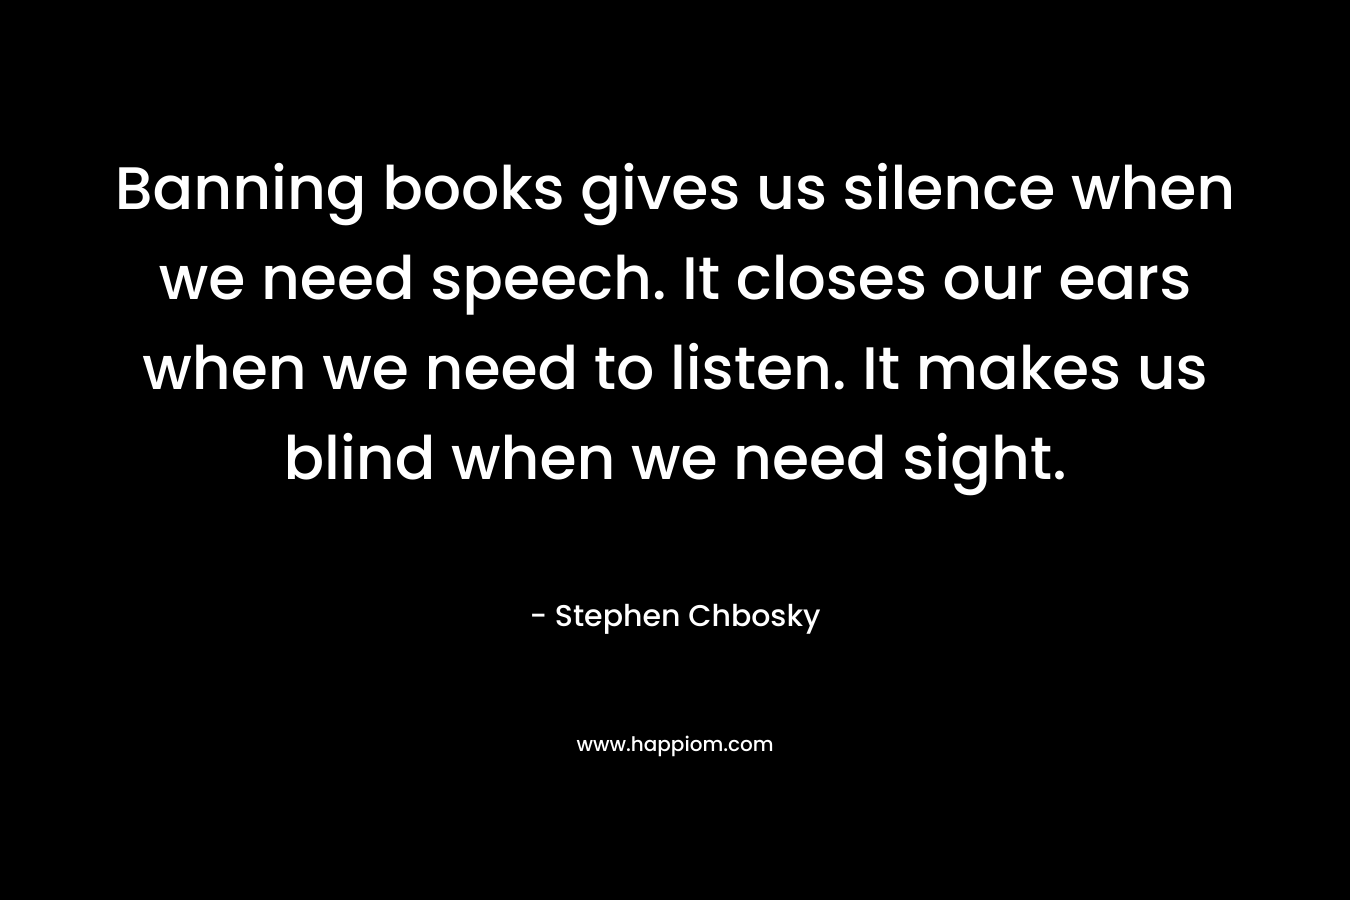 Banning books gives us silence when we need speech. It closes our ears when we need to listen. It makes us blind when we need sight. – Stephen Chbosky